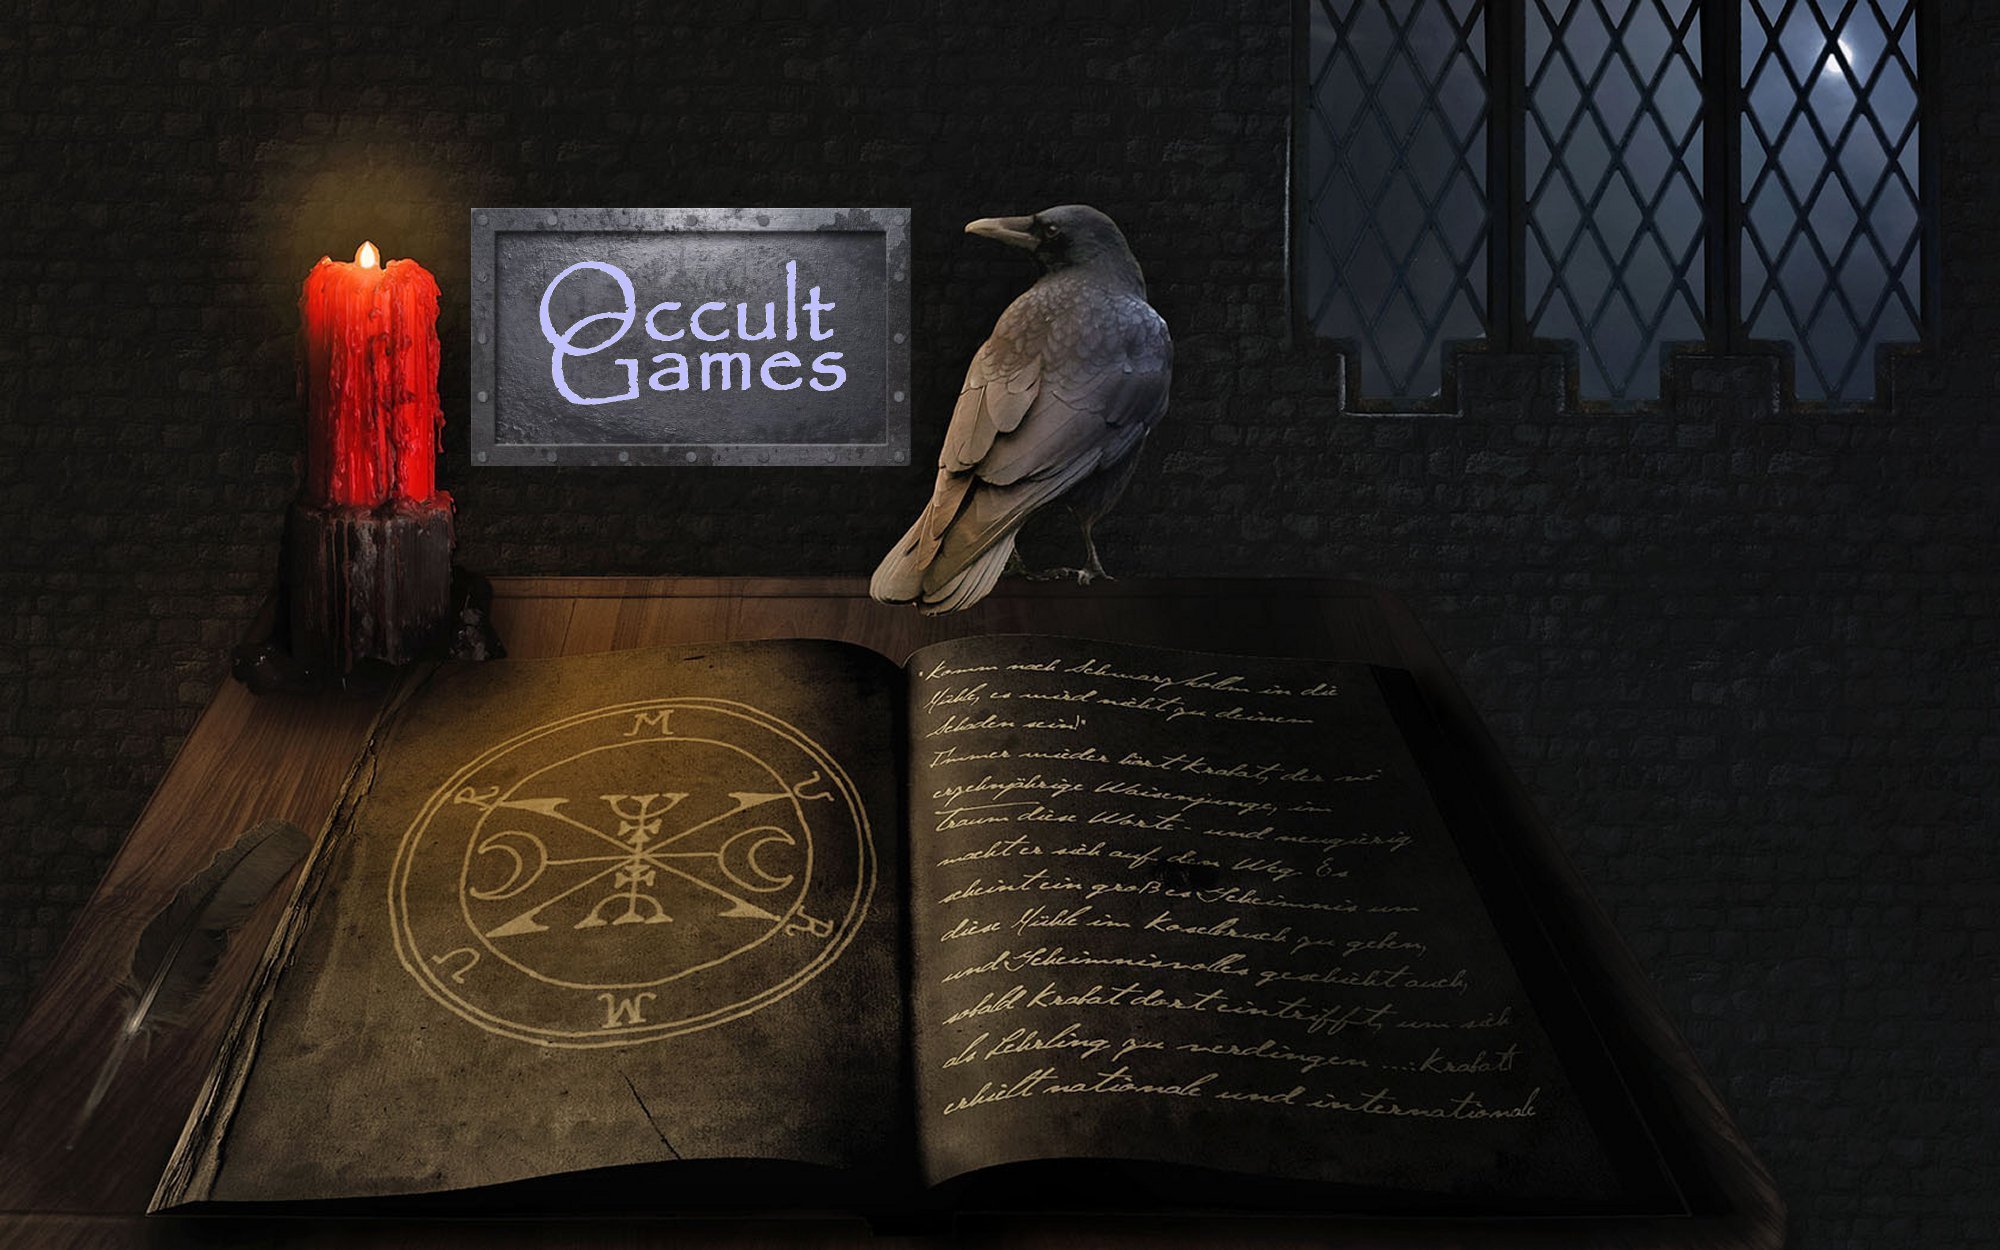 Occult Games Online